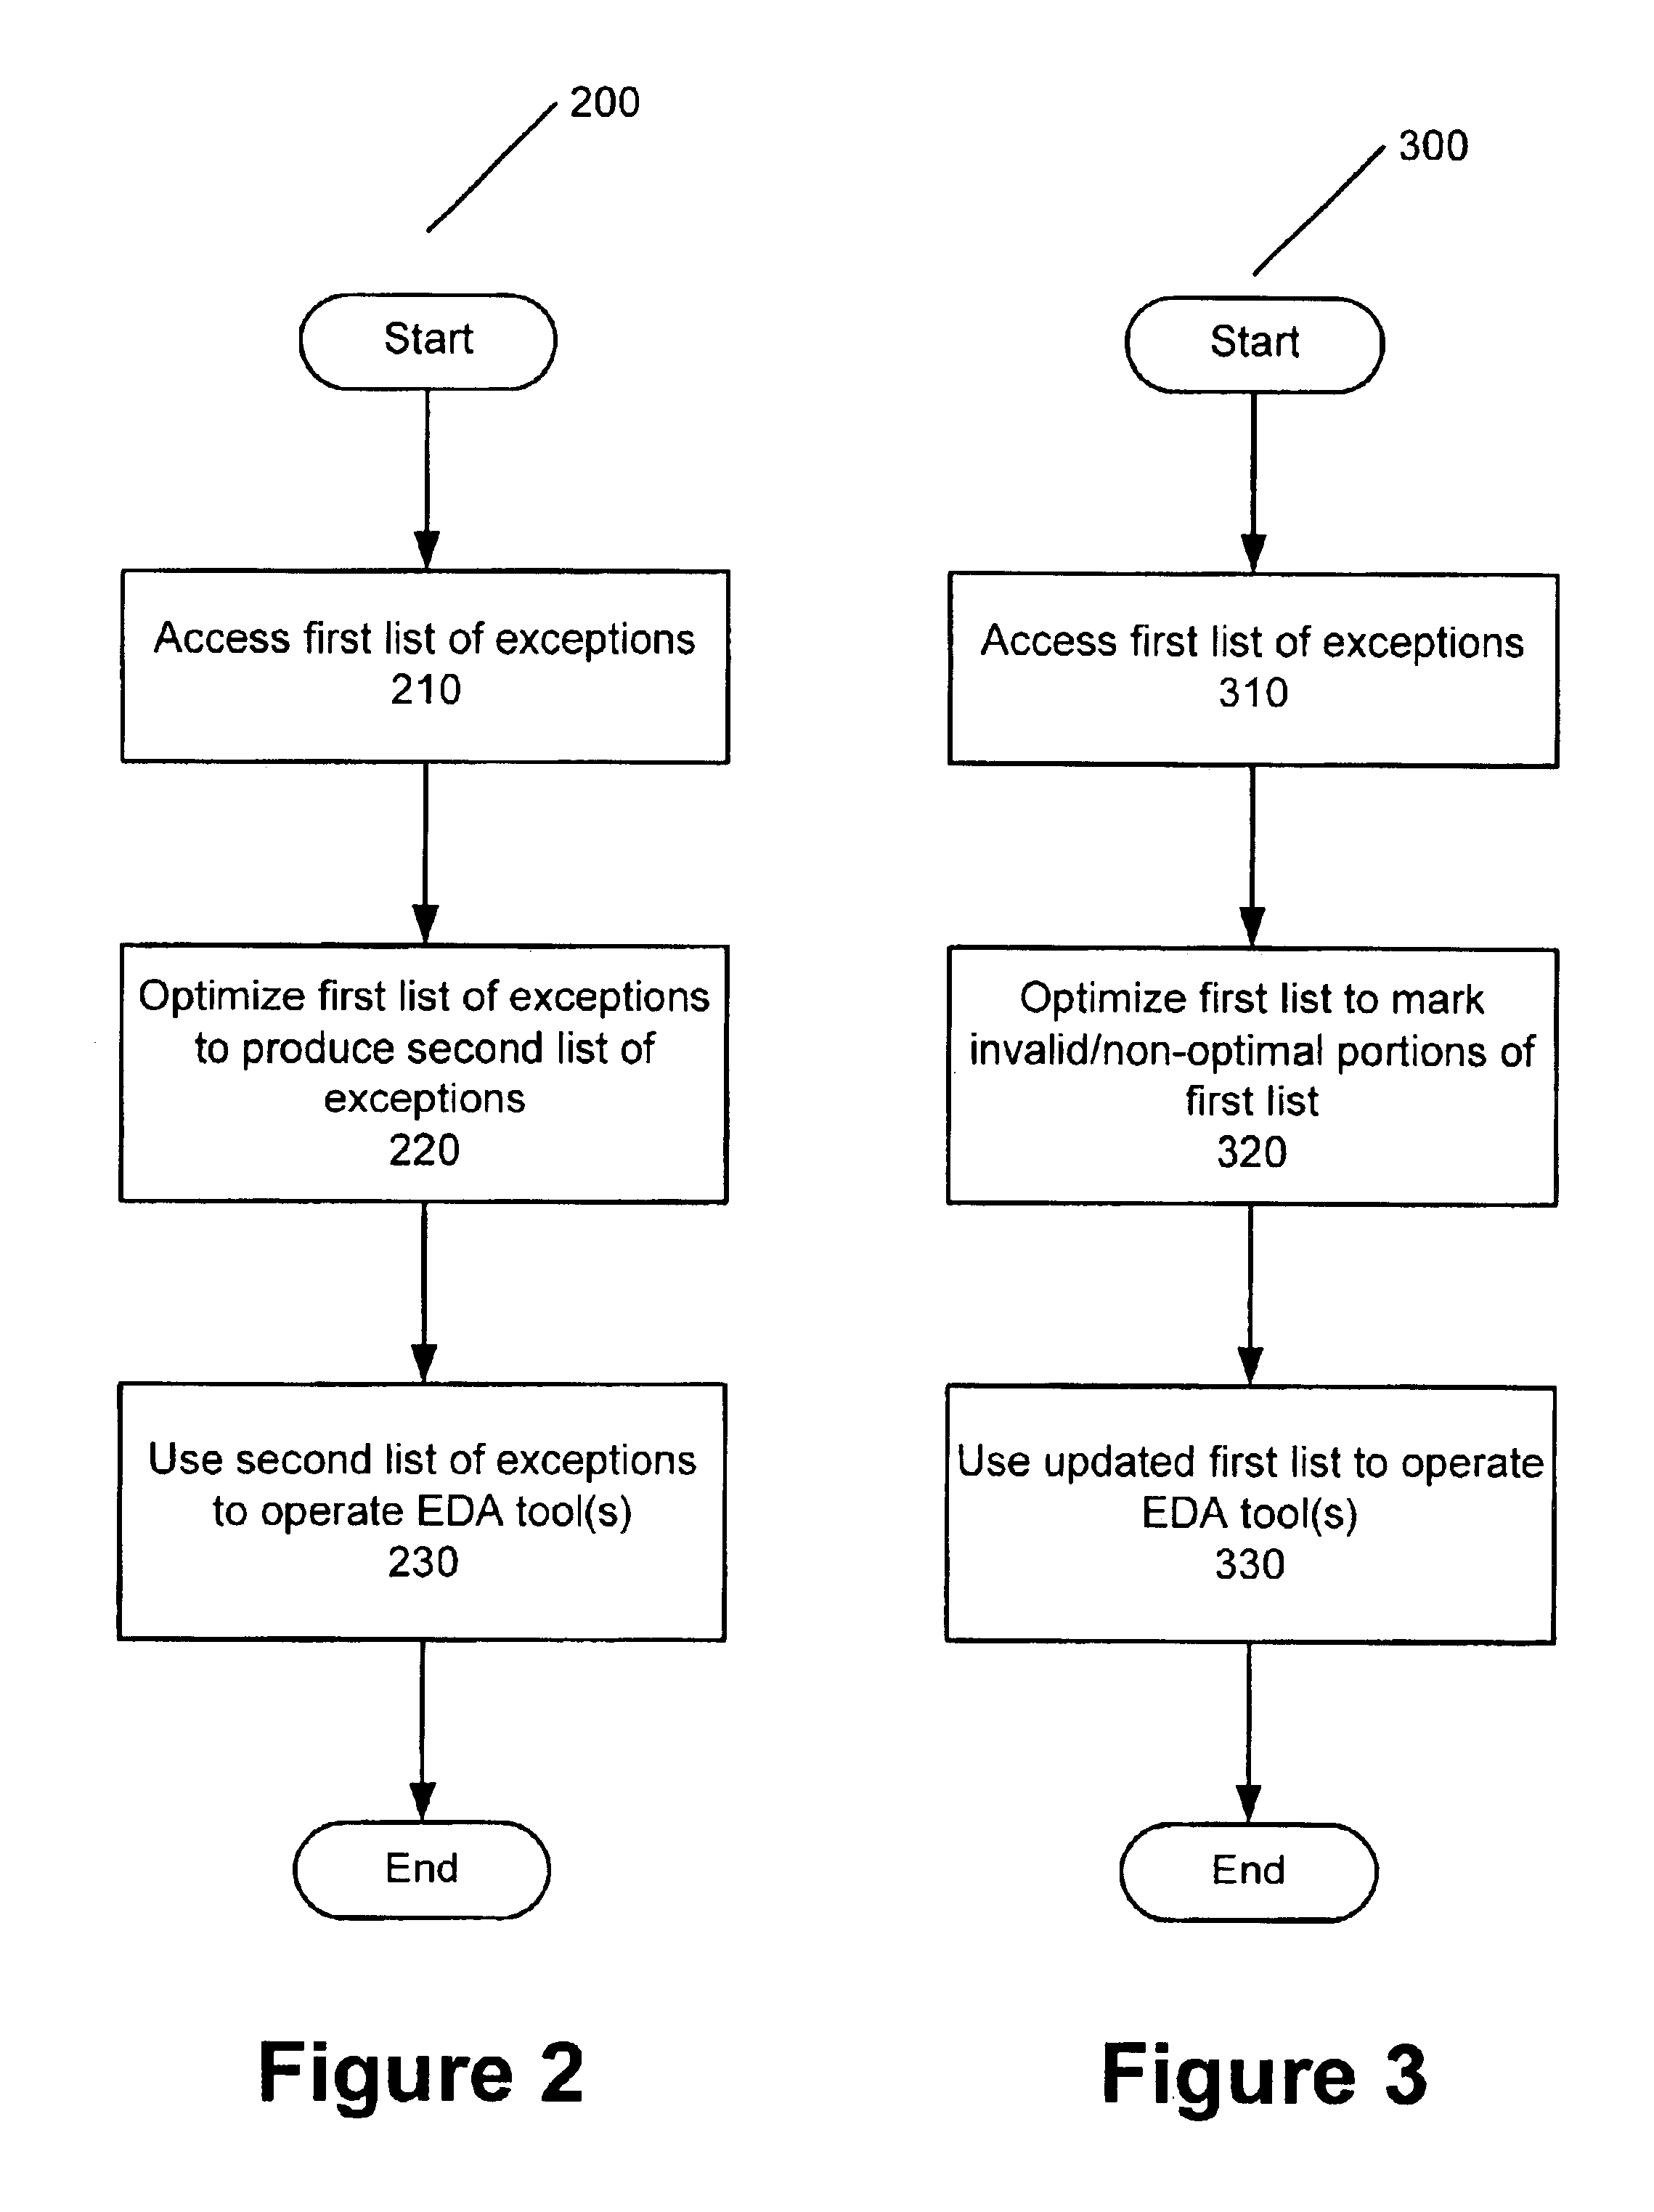 System and method for optimizing exceptions